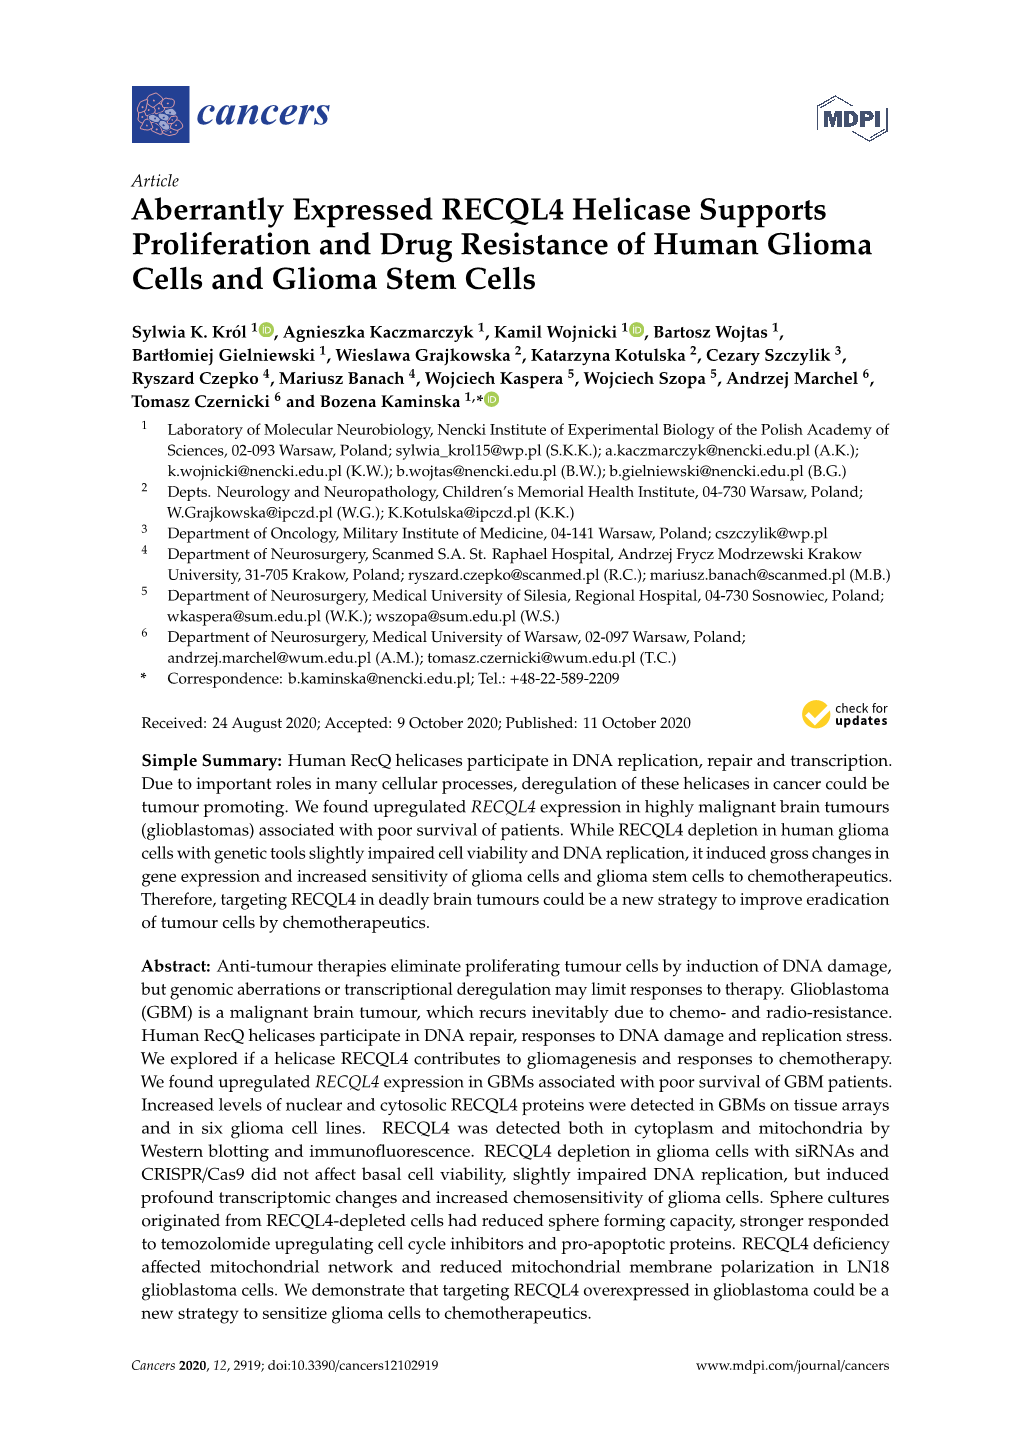 Aberrantly Expressed RECQL4 Helicase Supports Proliferation and Drug Resistance of Human Glioma Cells and Glioma Stem Cells